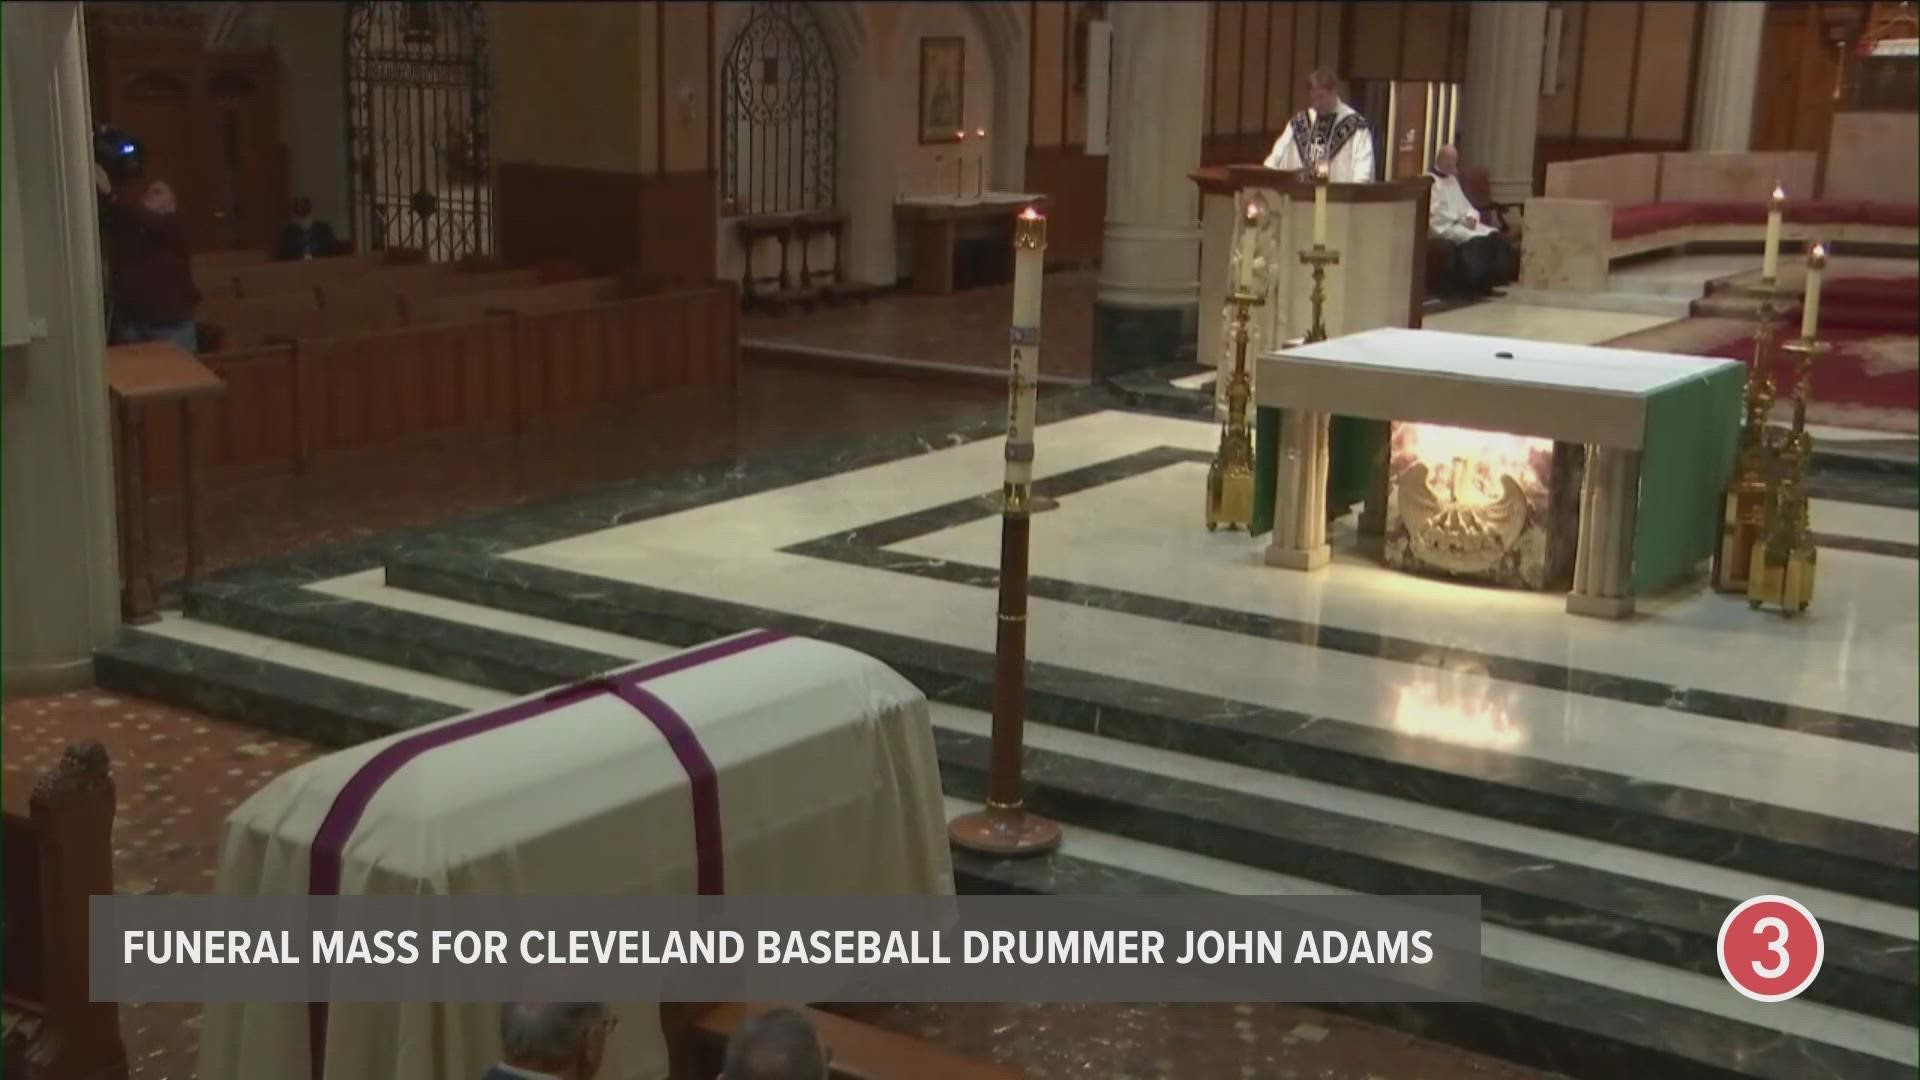 Cleveland baseball drummer John Adams was remembered during a funeral mass on Saturday.